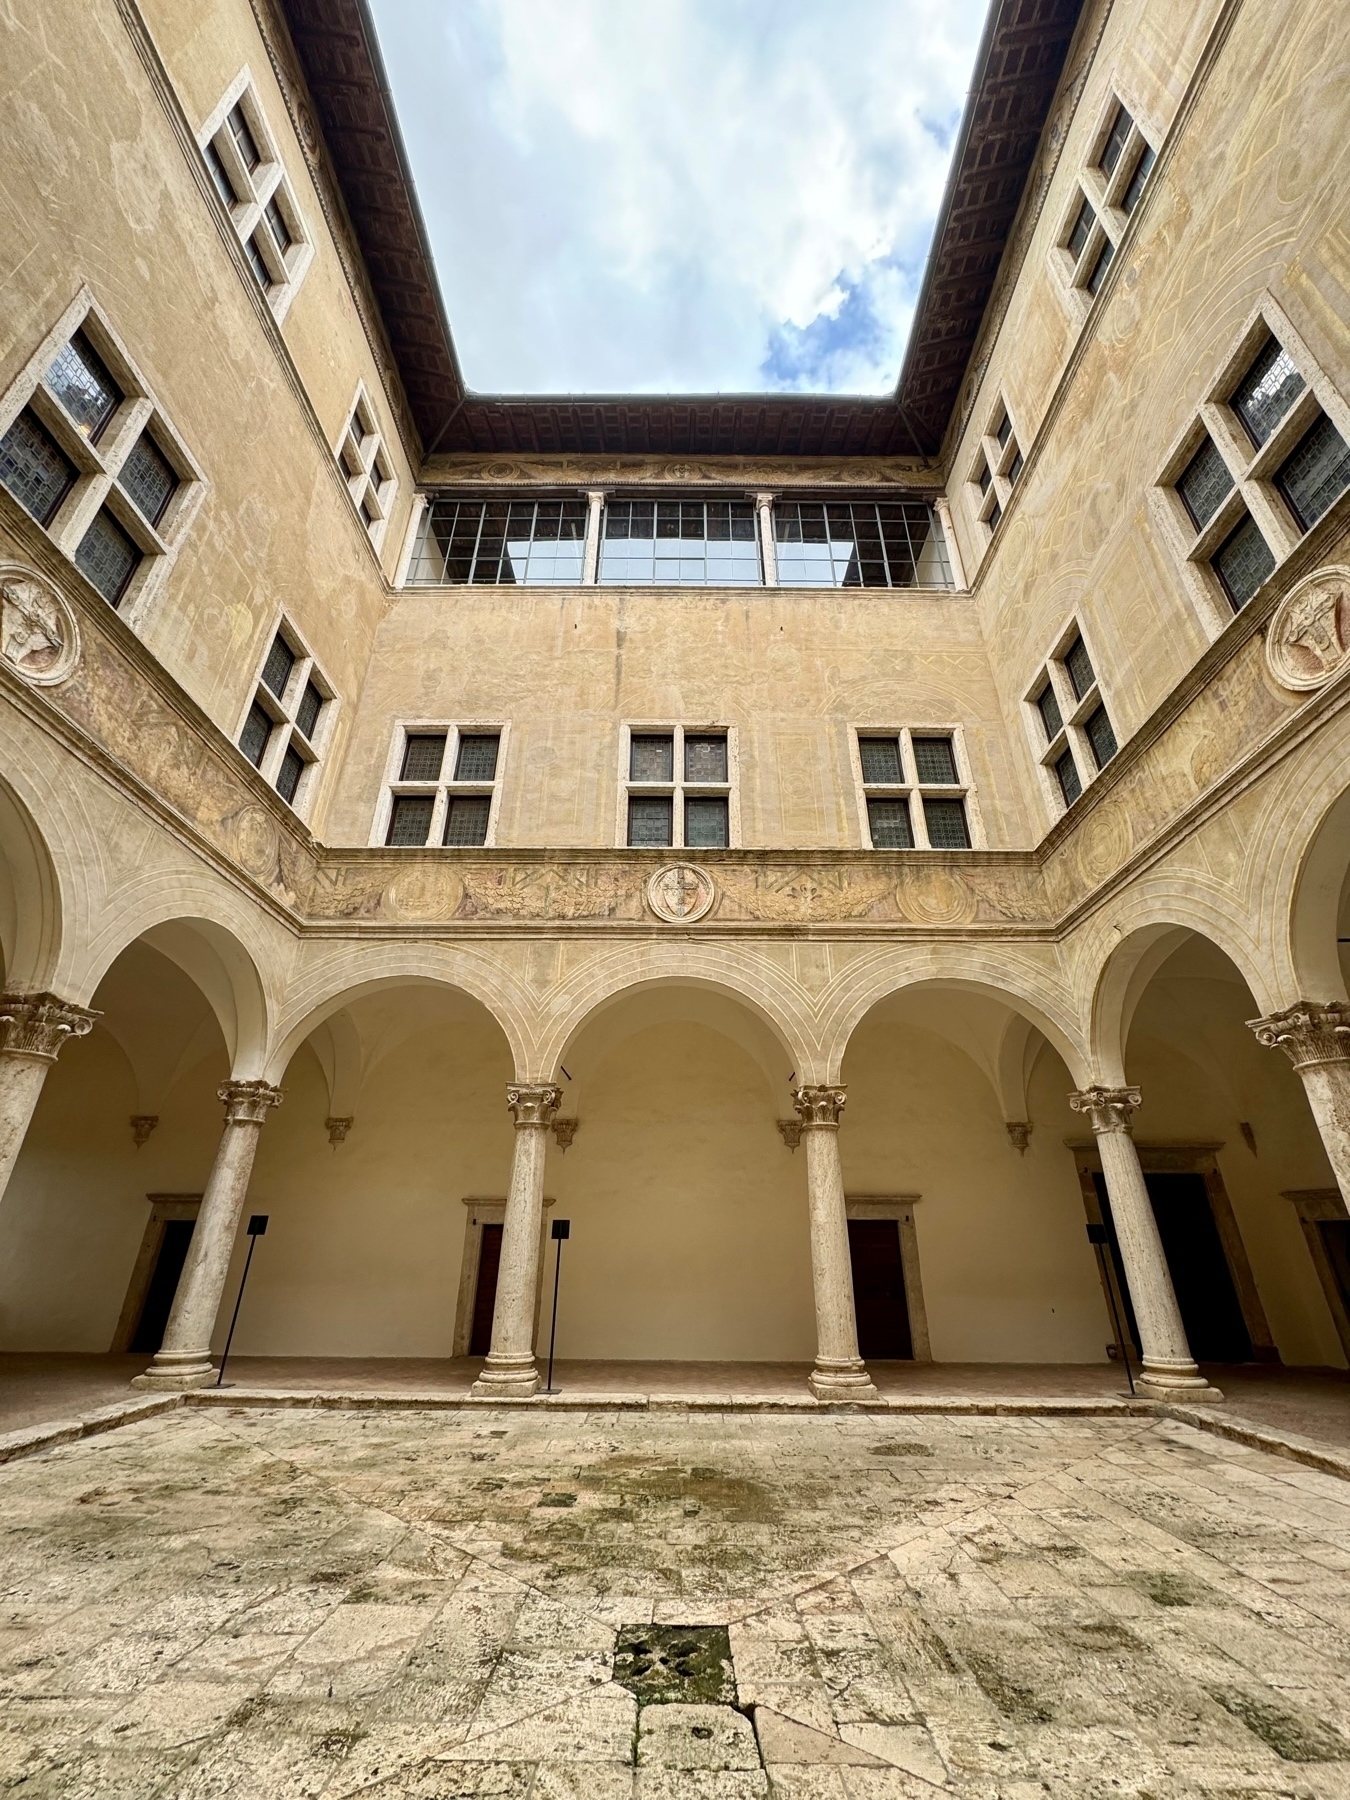 The image depicts the interior courtyard of a historic building, featuring an open atrium with arched columns and two levels of windows. The courtyard has a stone floor with weathered and cracked tiles. The upper level has decorated walls and windows. 